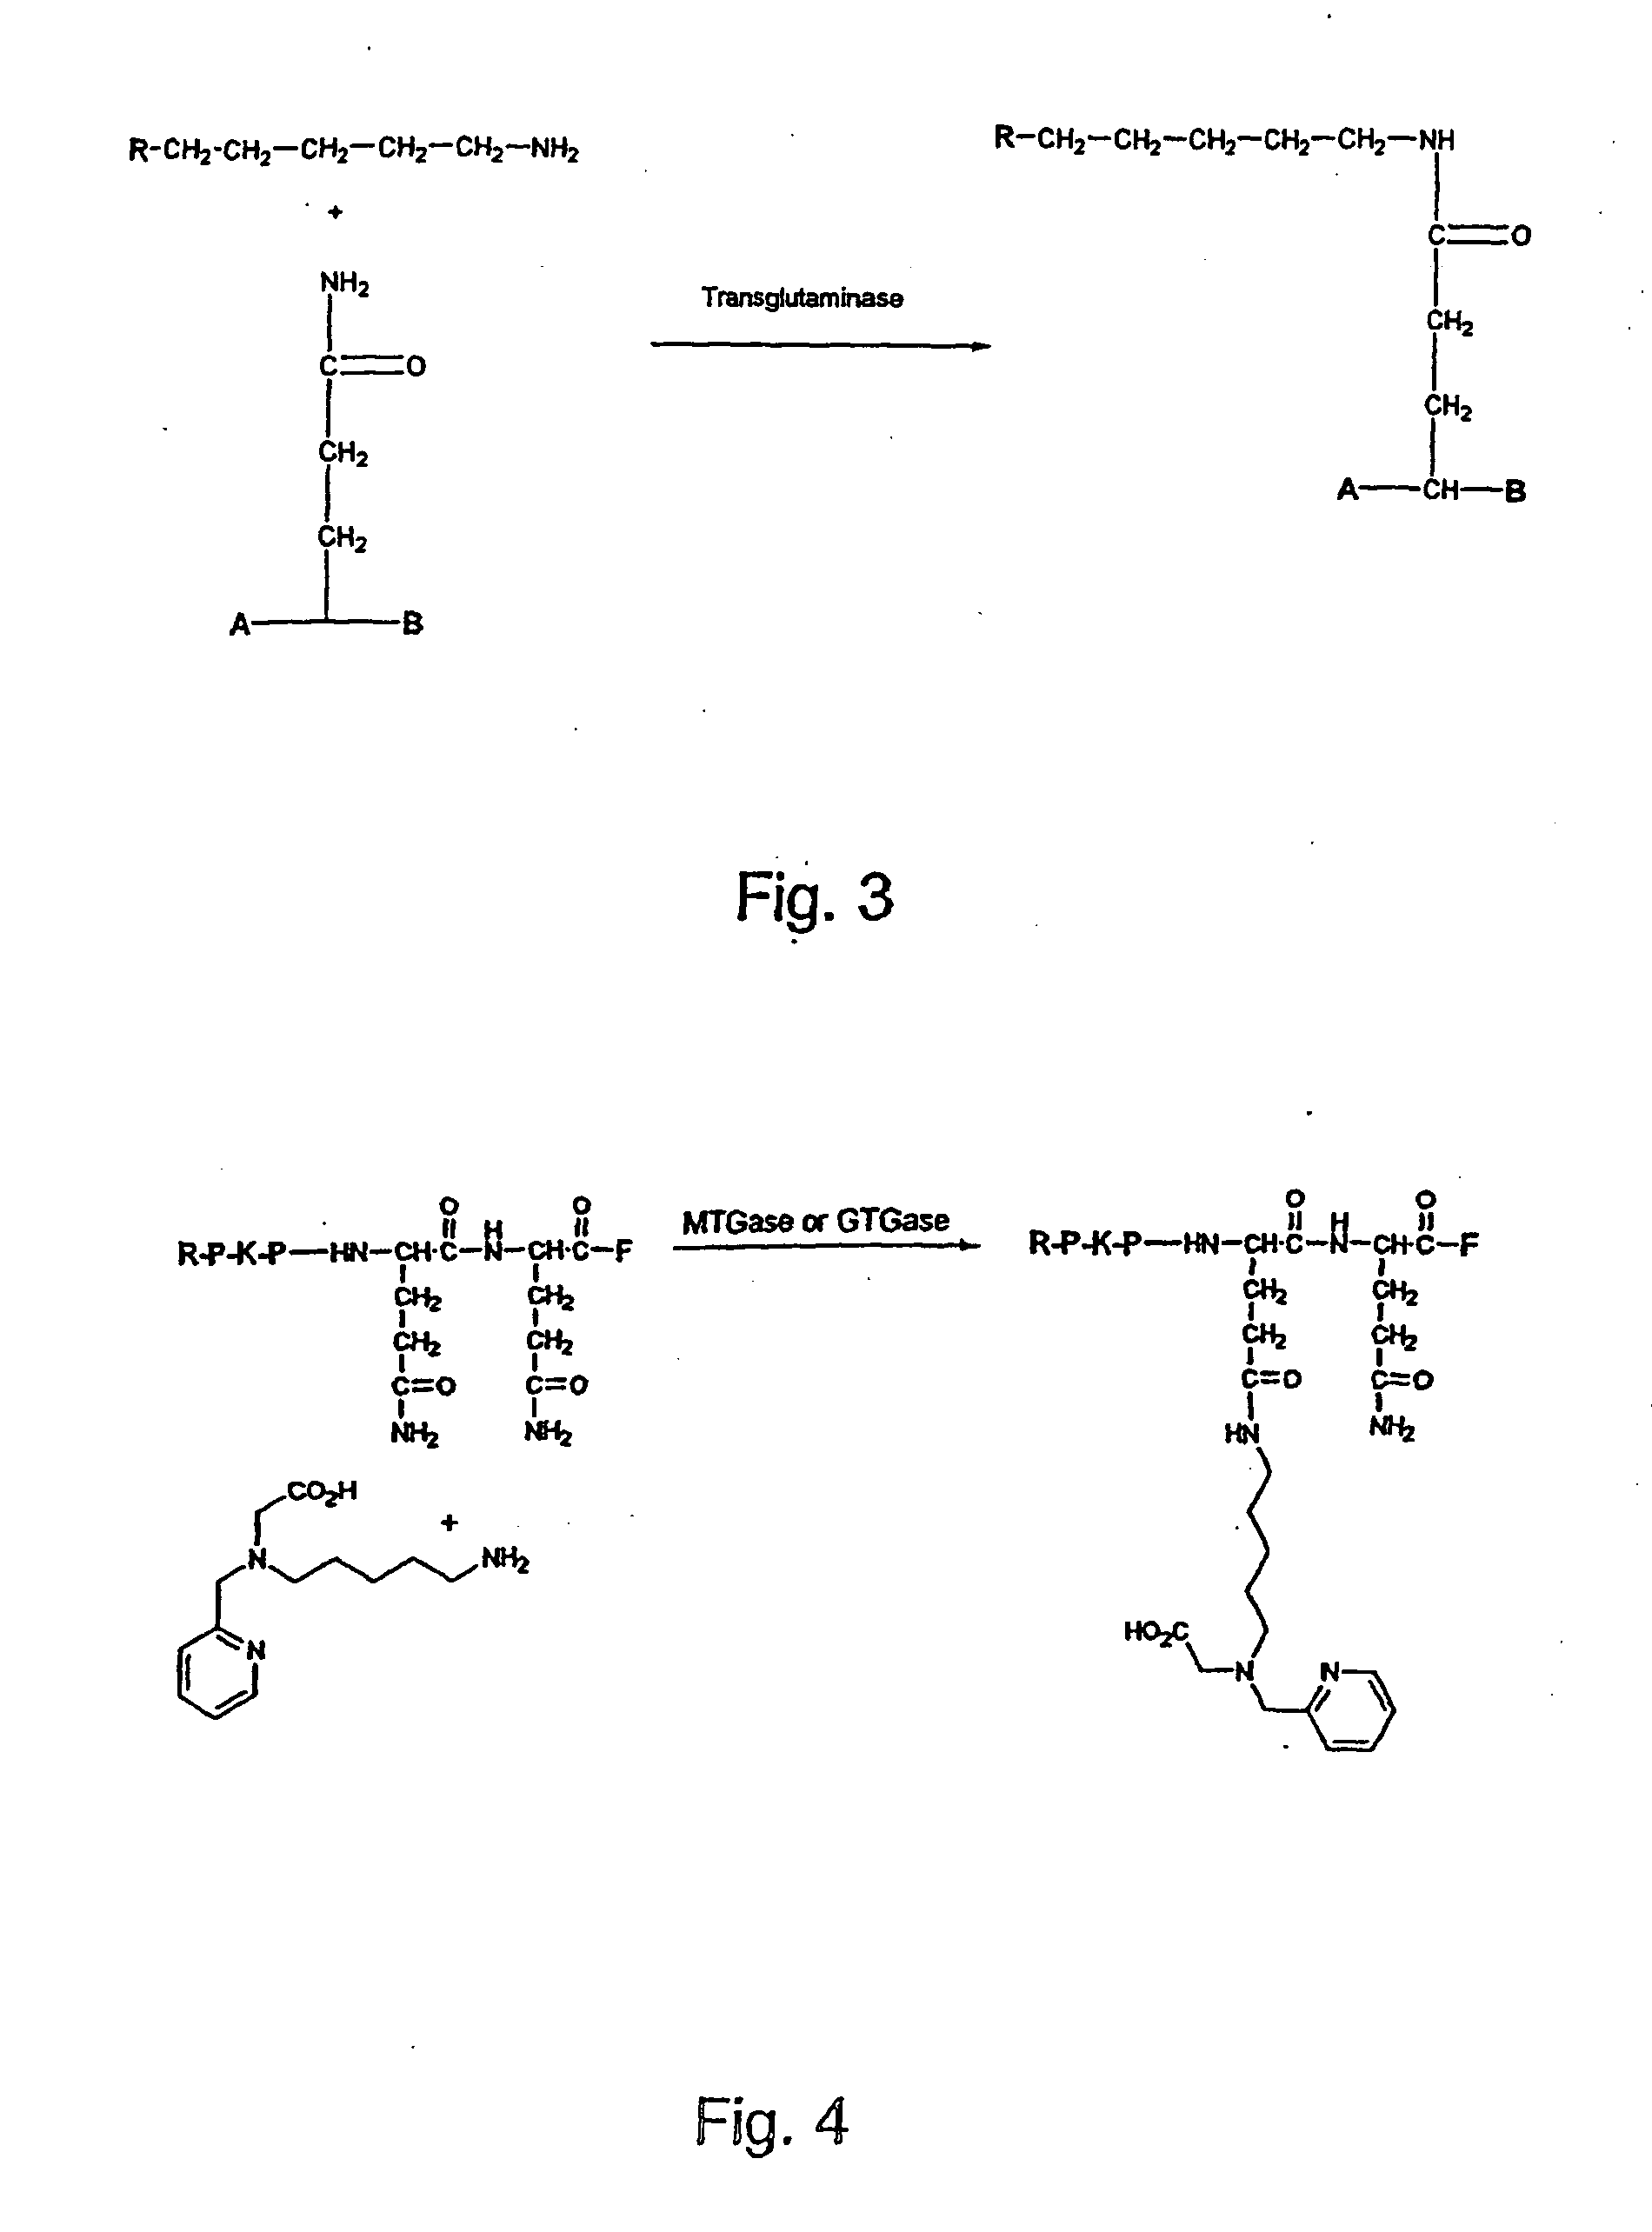 Method for the linkage of bifunctional chelating agents and (radioactive) transition metal complexes to proteins and peptides